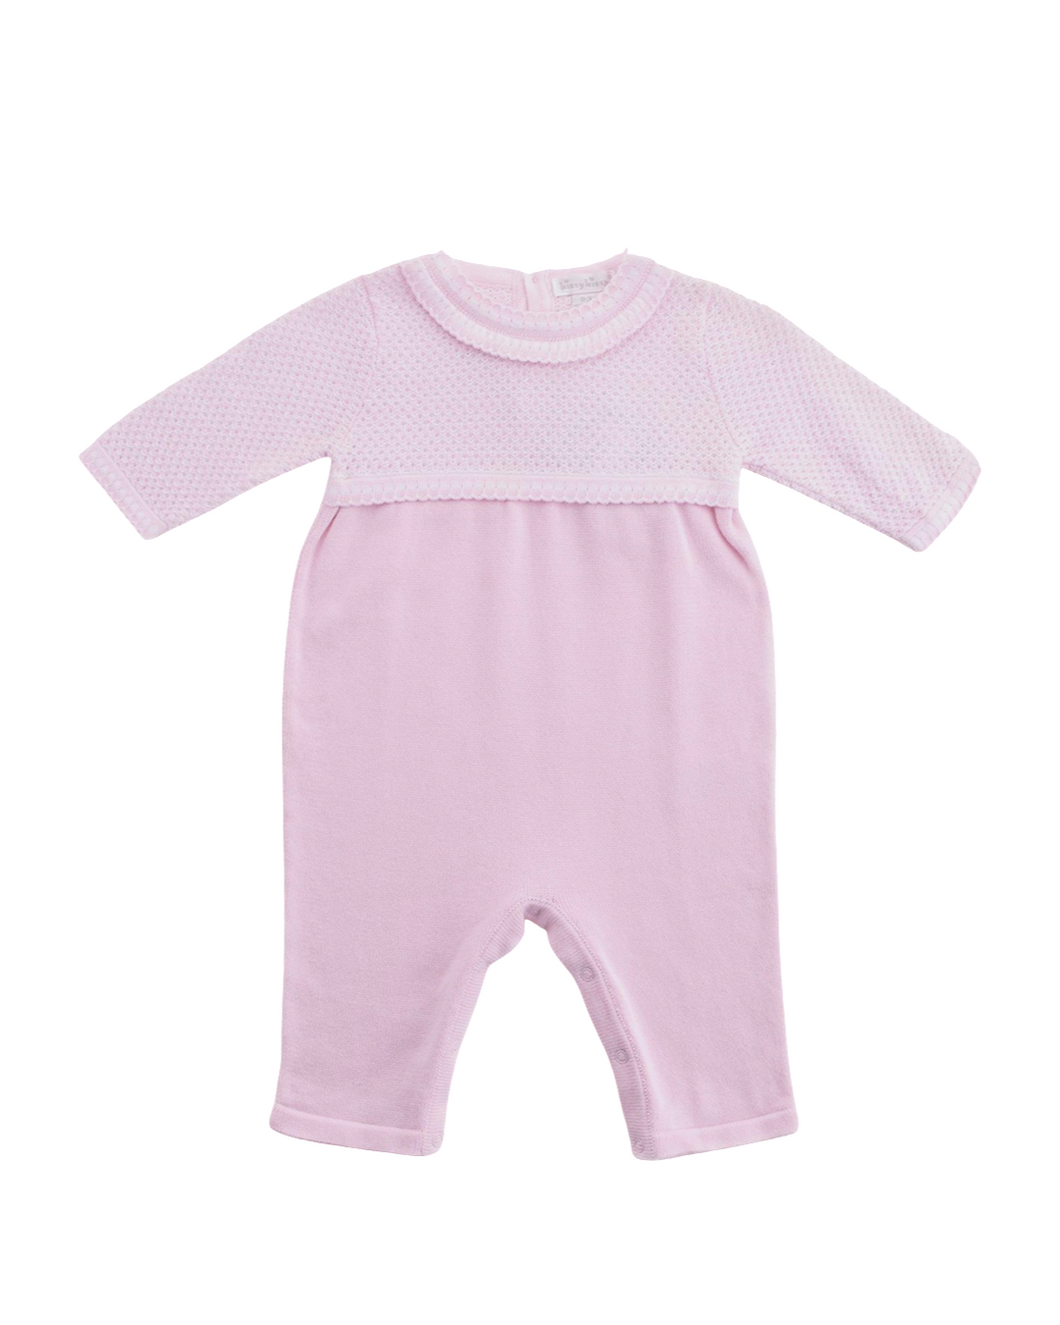 Girls pink all in one Outfit - Char-le-maine | Luxury Baby & Children's Wear